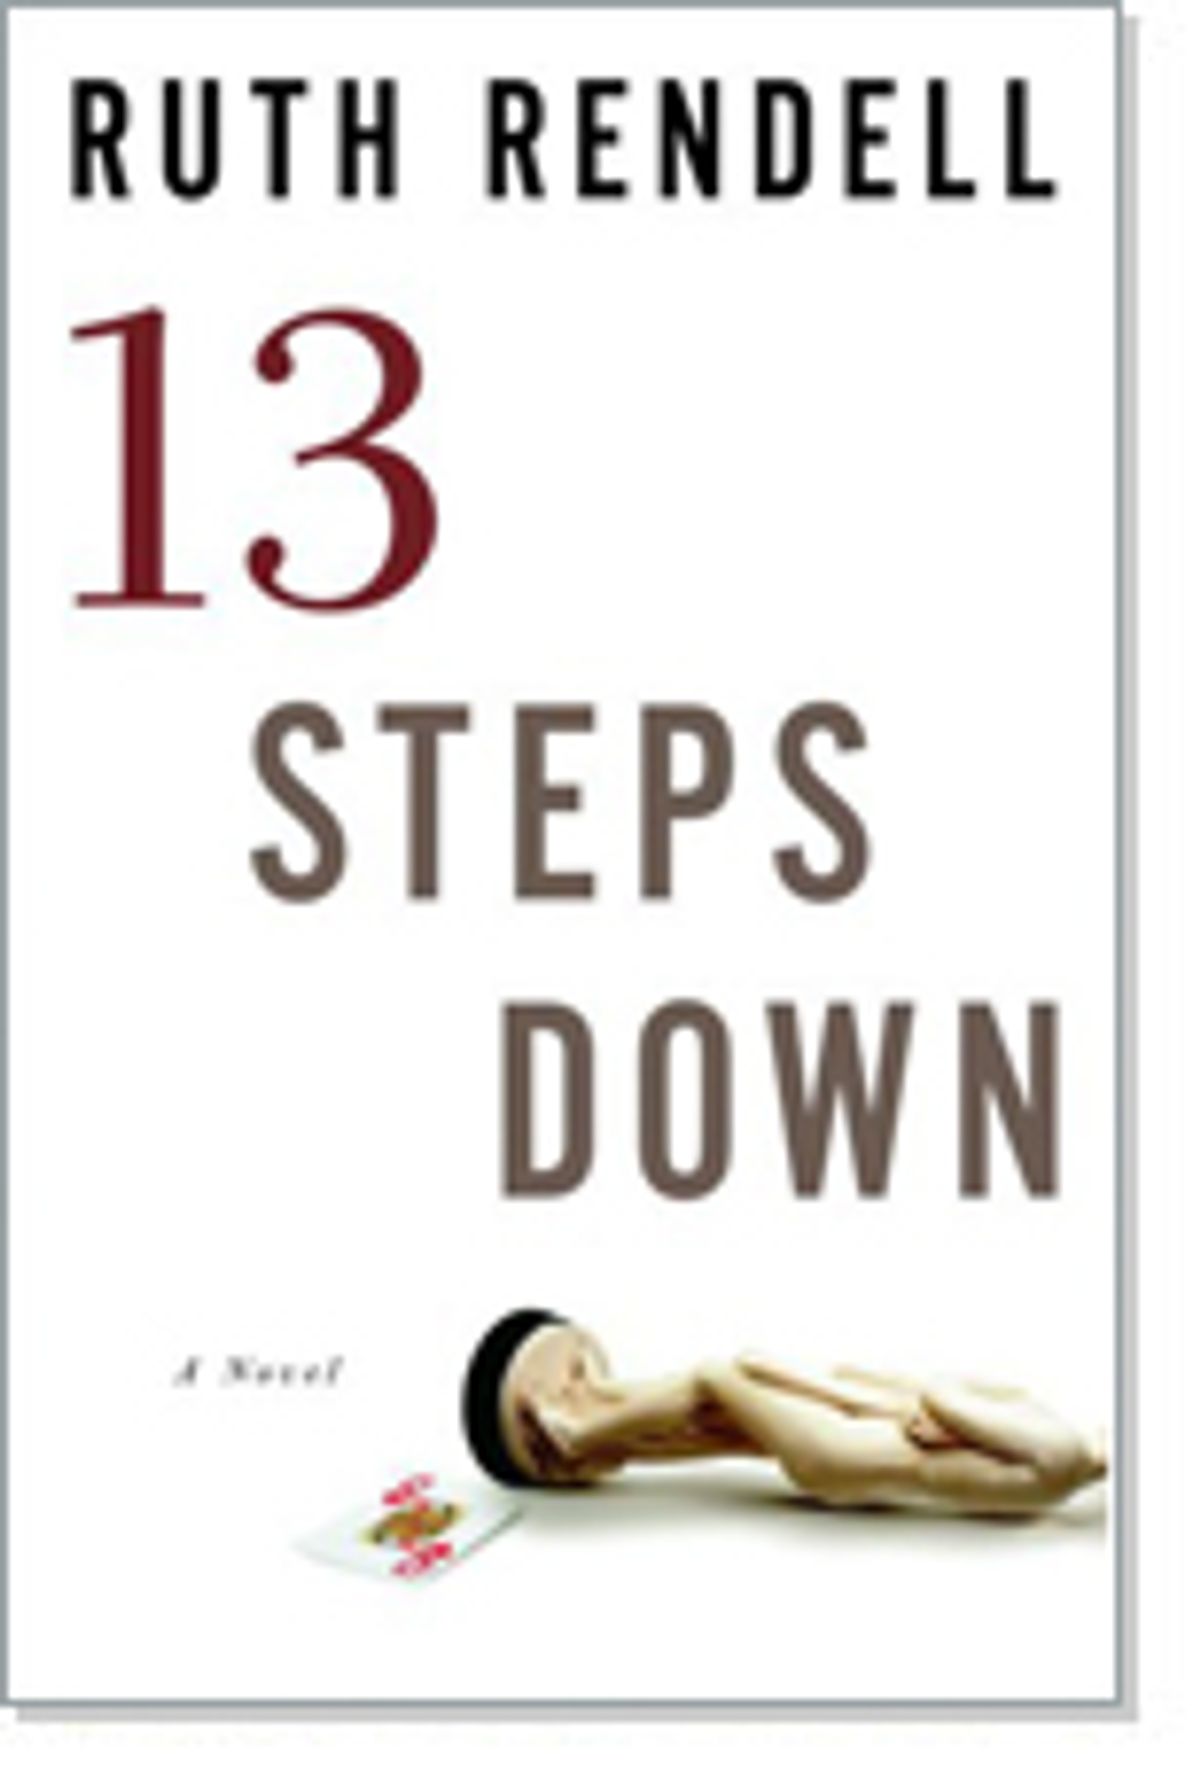 Ruth Rendell the professional. Steps down. Mother's help by Ruth Rendell. 13 steps